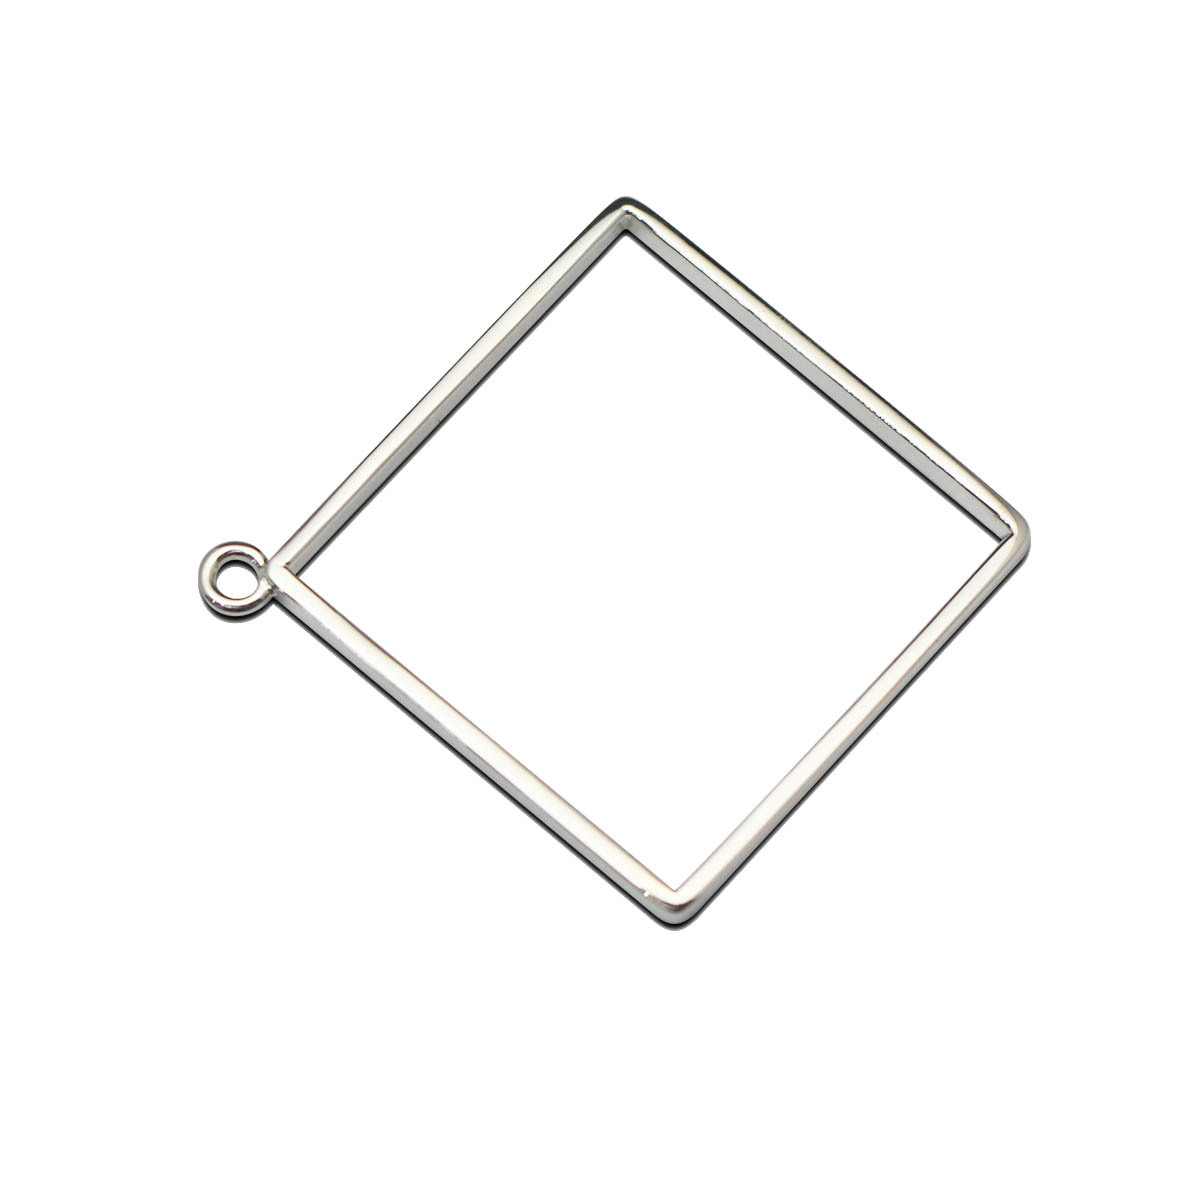 Solid Silver Jewelry Setting Accessories Square Charms Hollow Glue Blank Pendant Tray Bezel Charms DIY Handmade